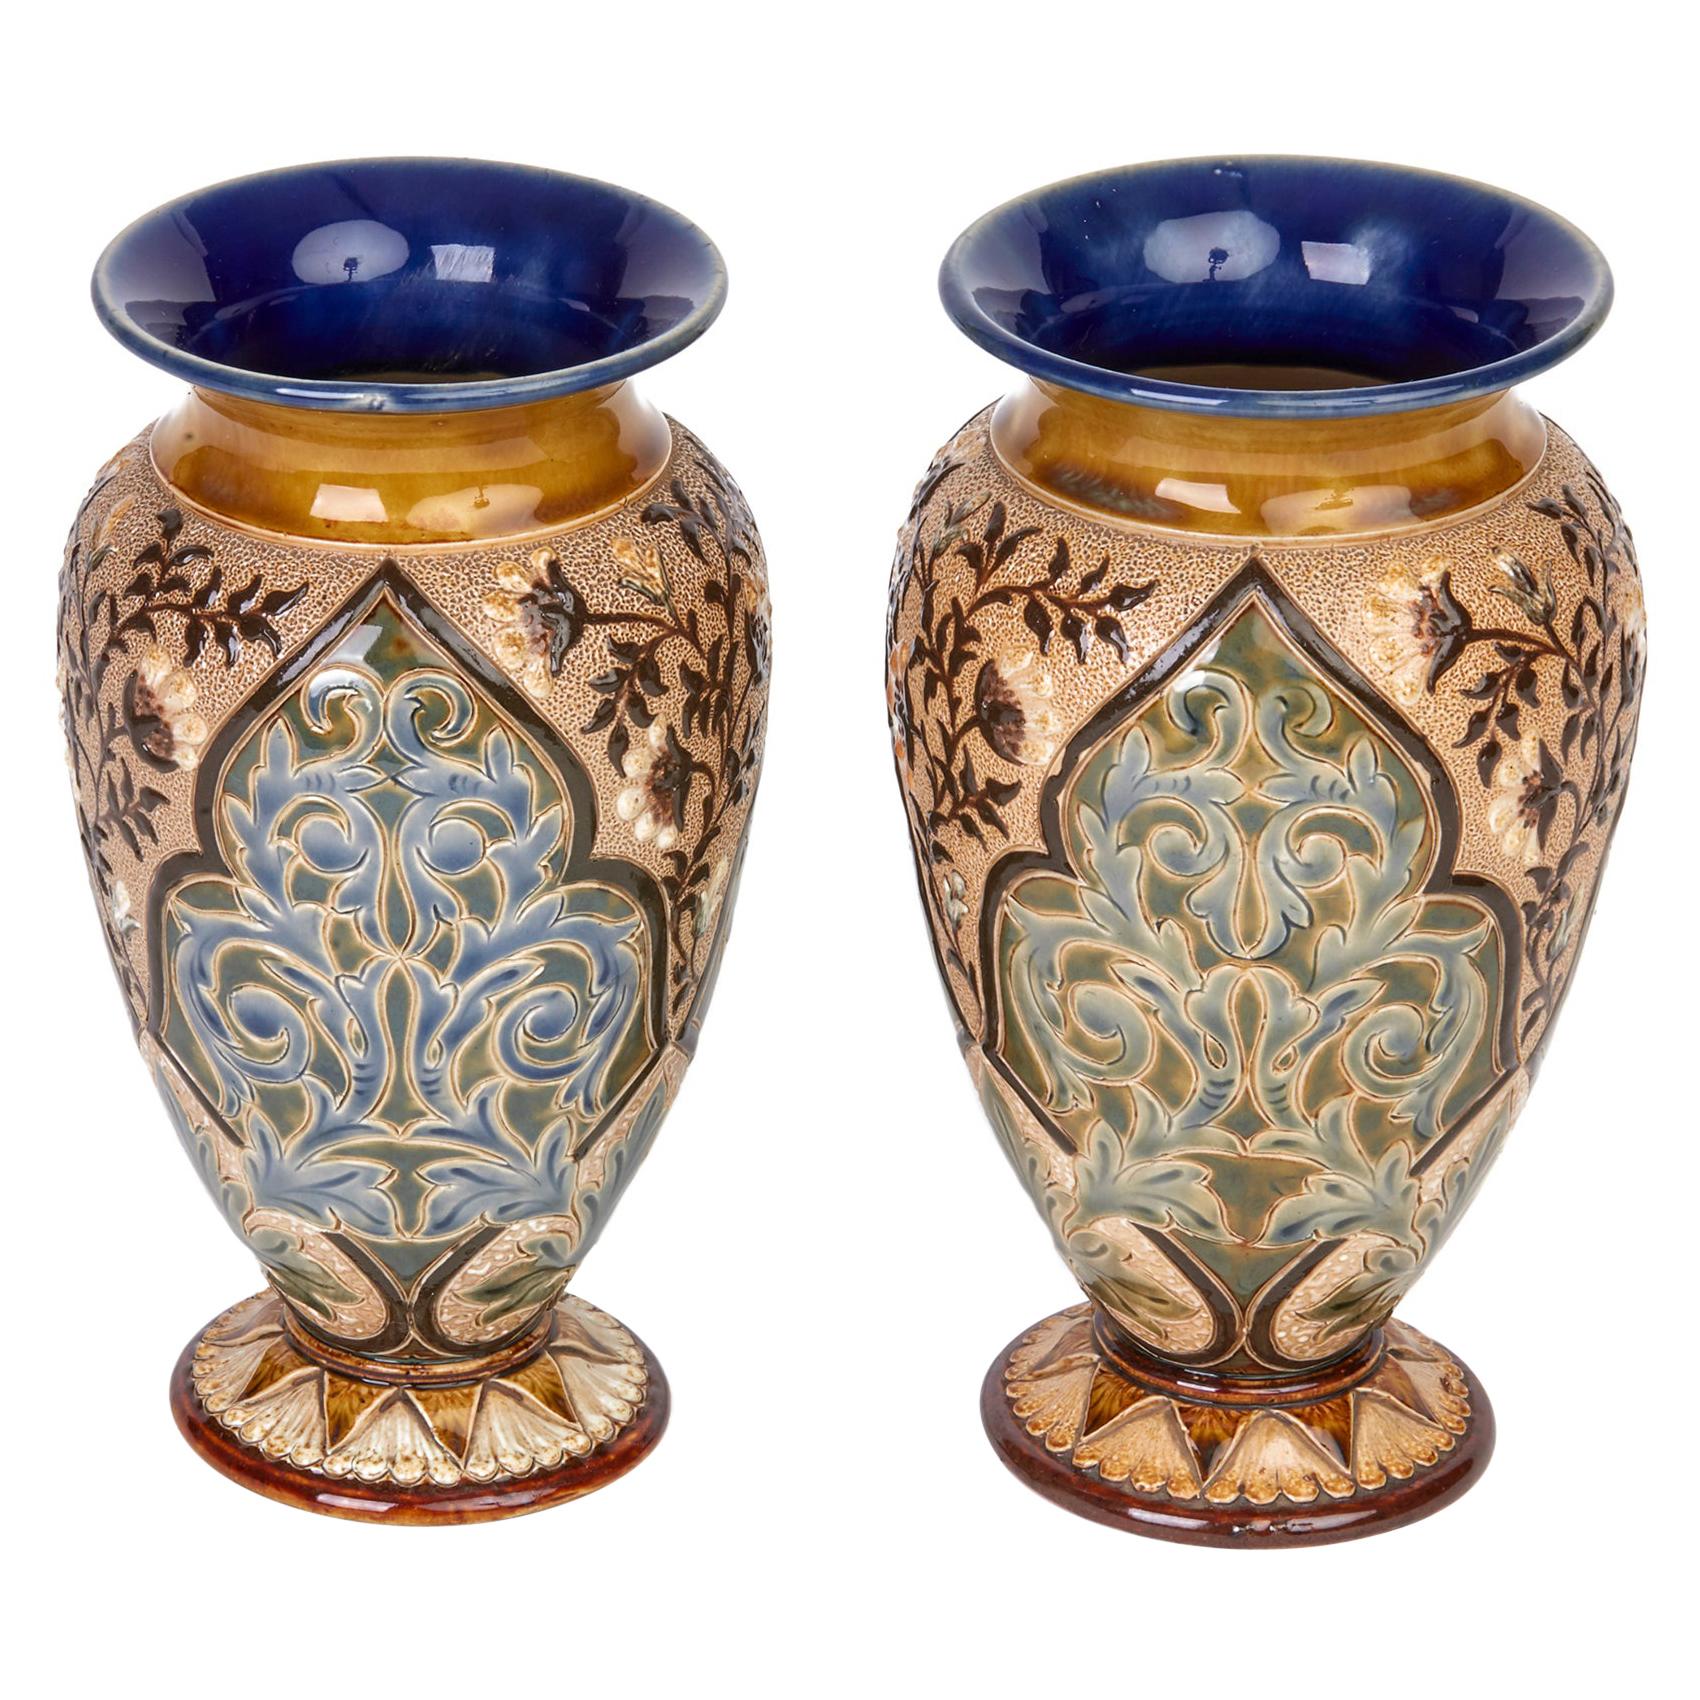 Doulton Lambeth Pair of Exceptional Art Pottery Vases by Alice Barker, 1883